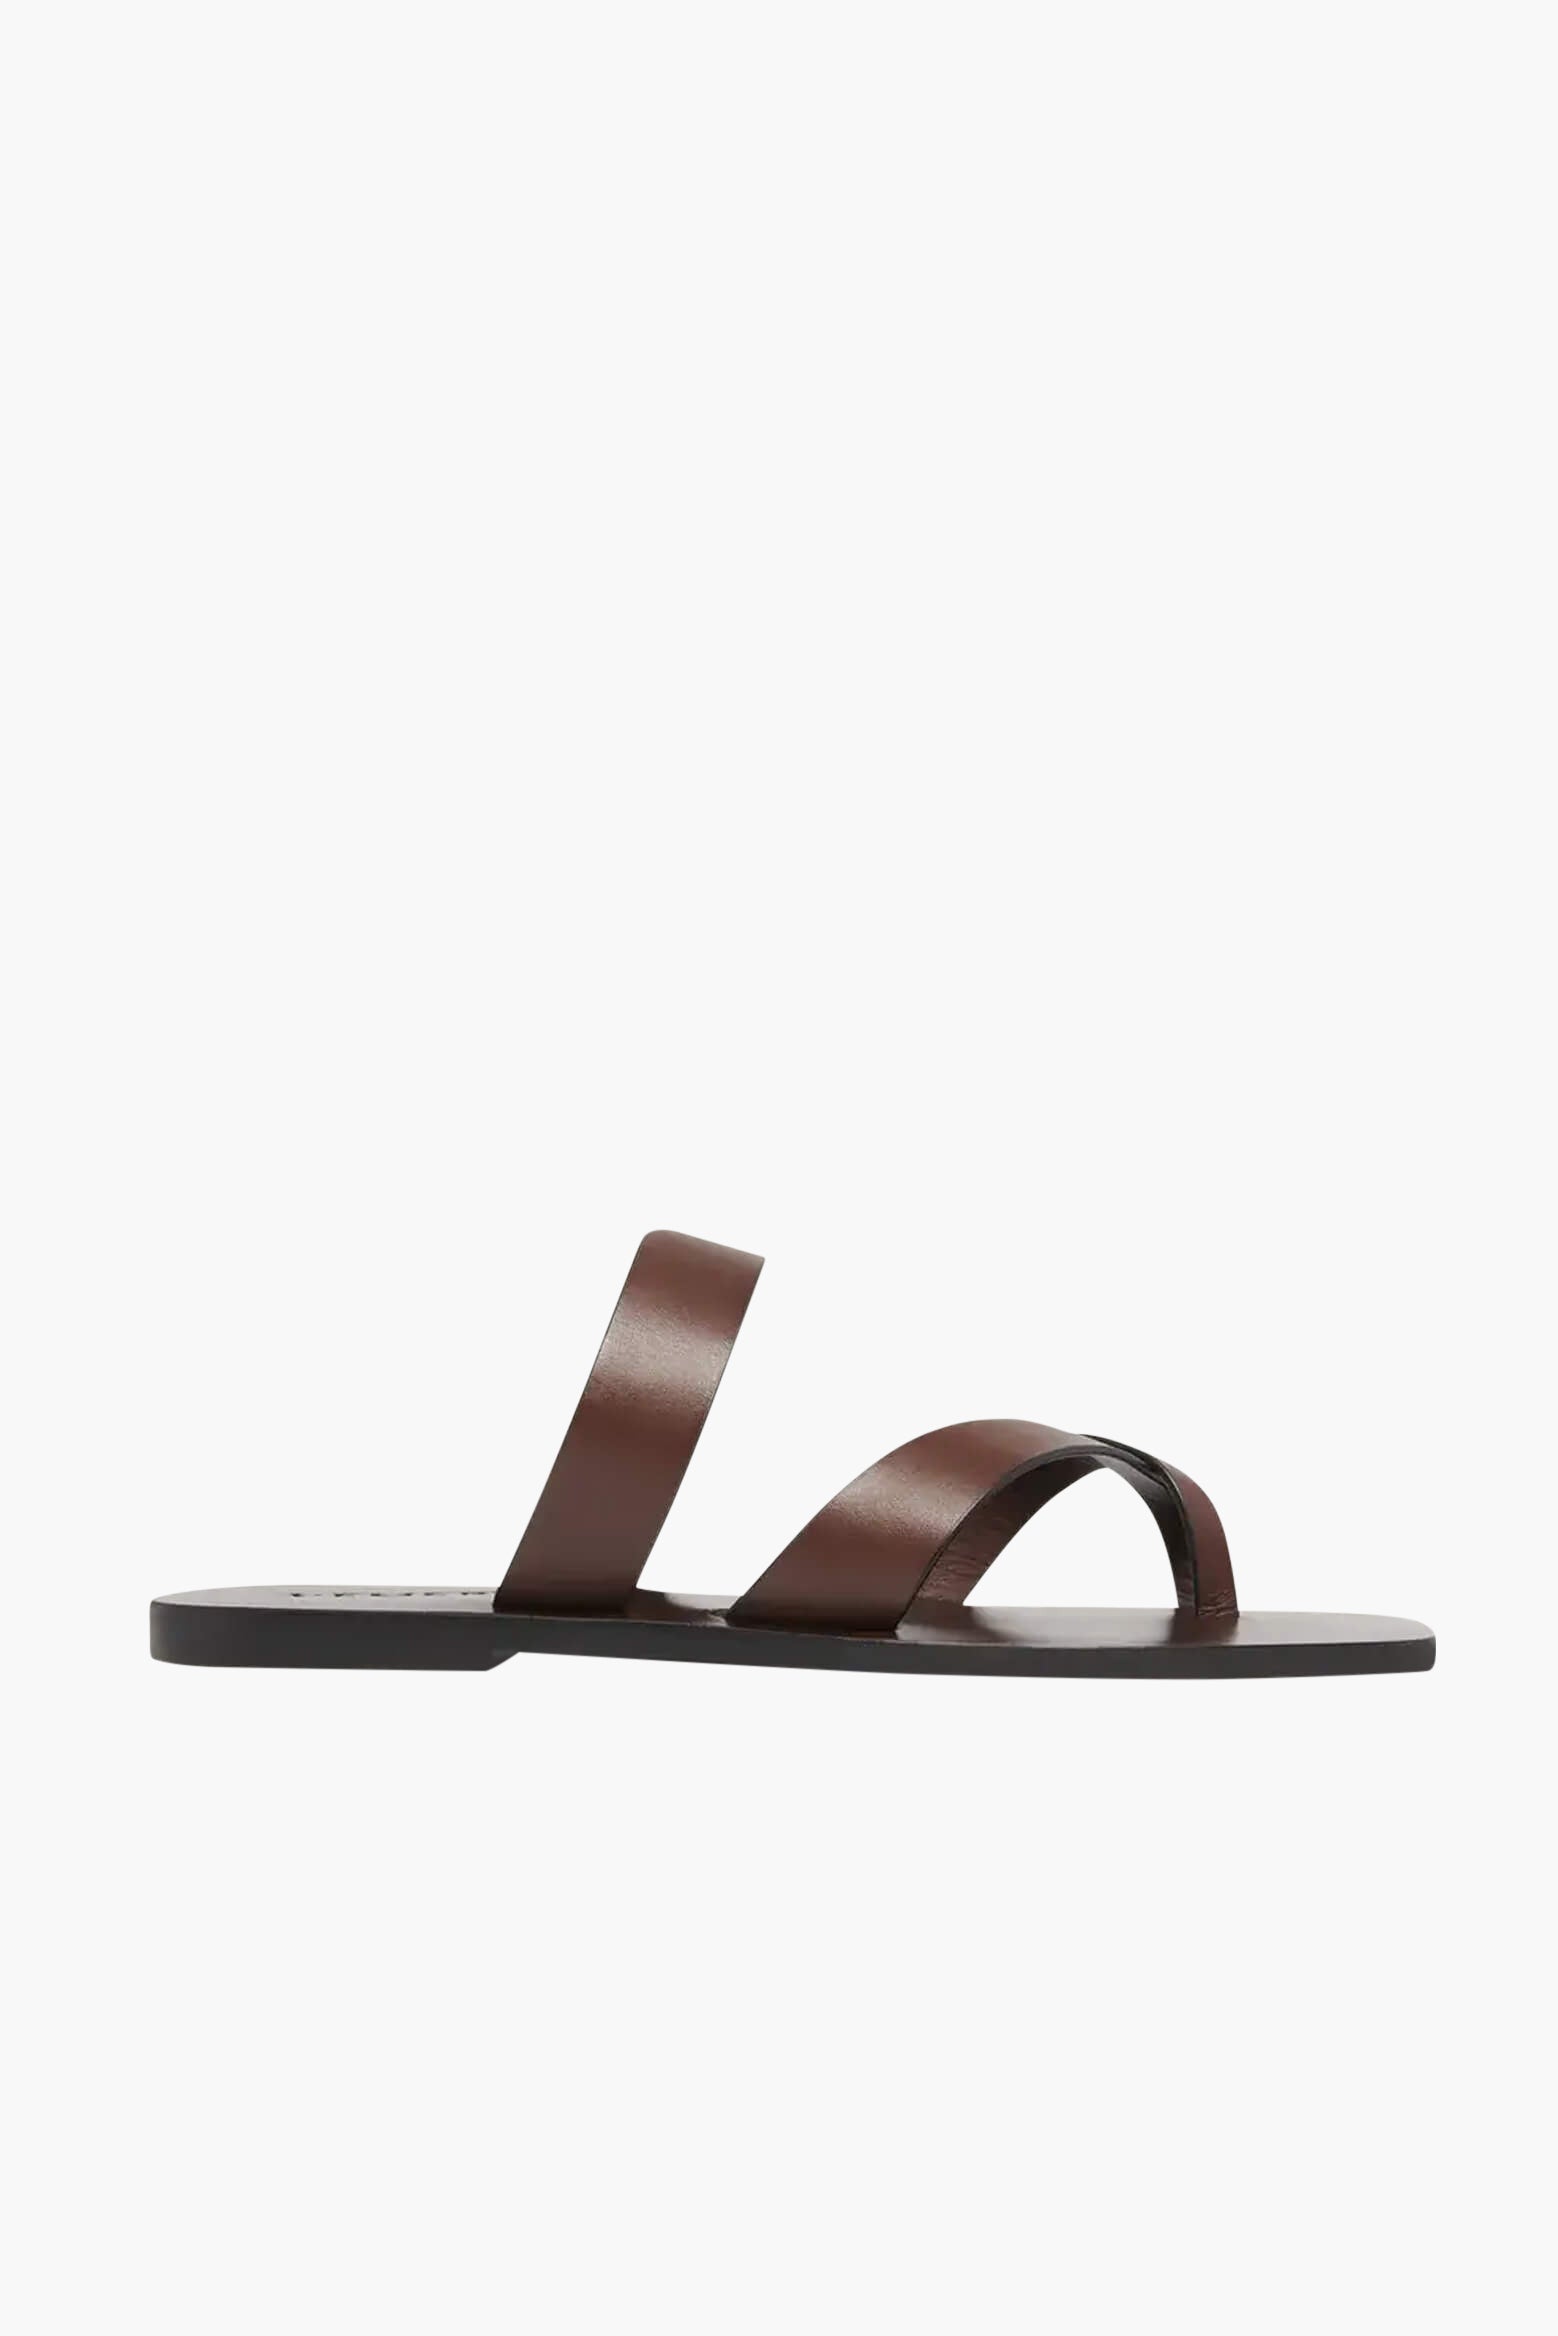 A.Emery Carter Sandal in Walnut from The New Trend